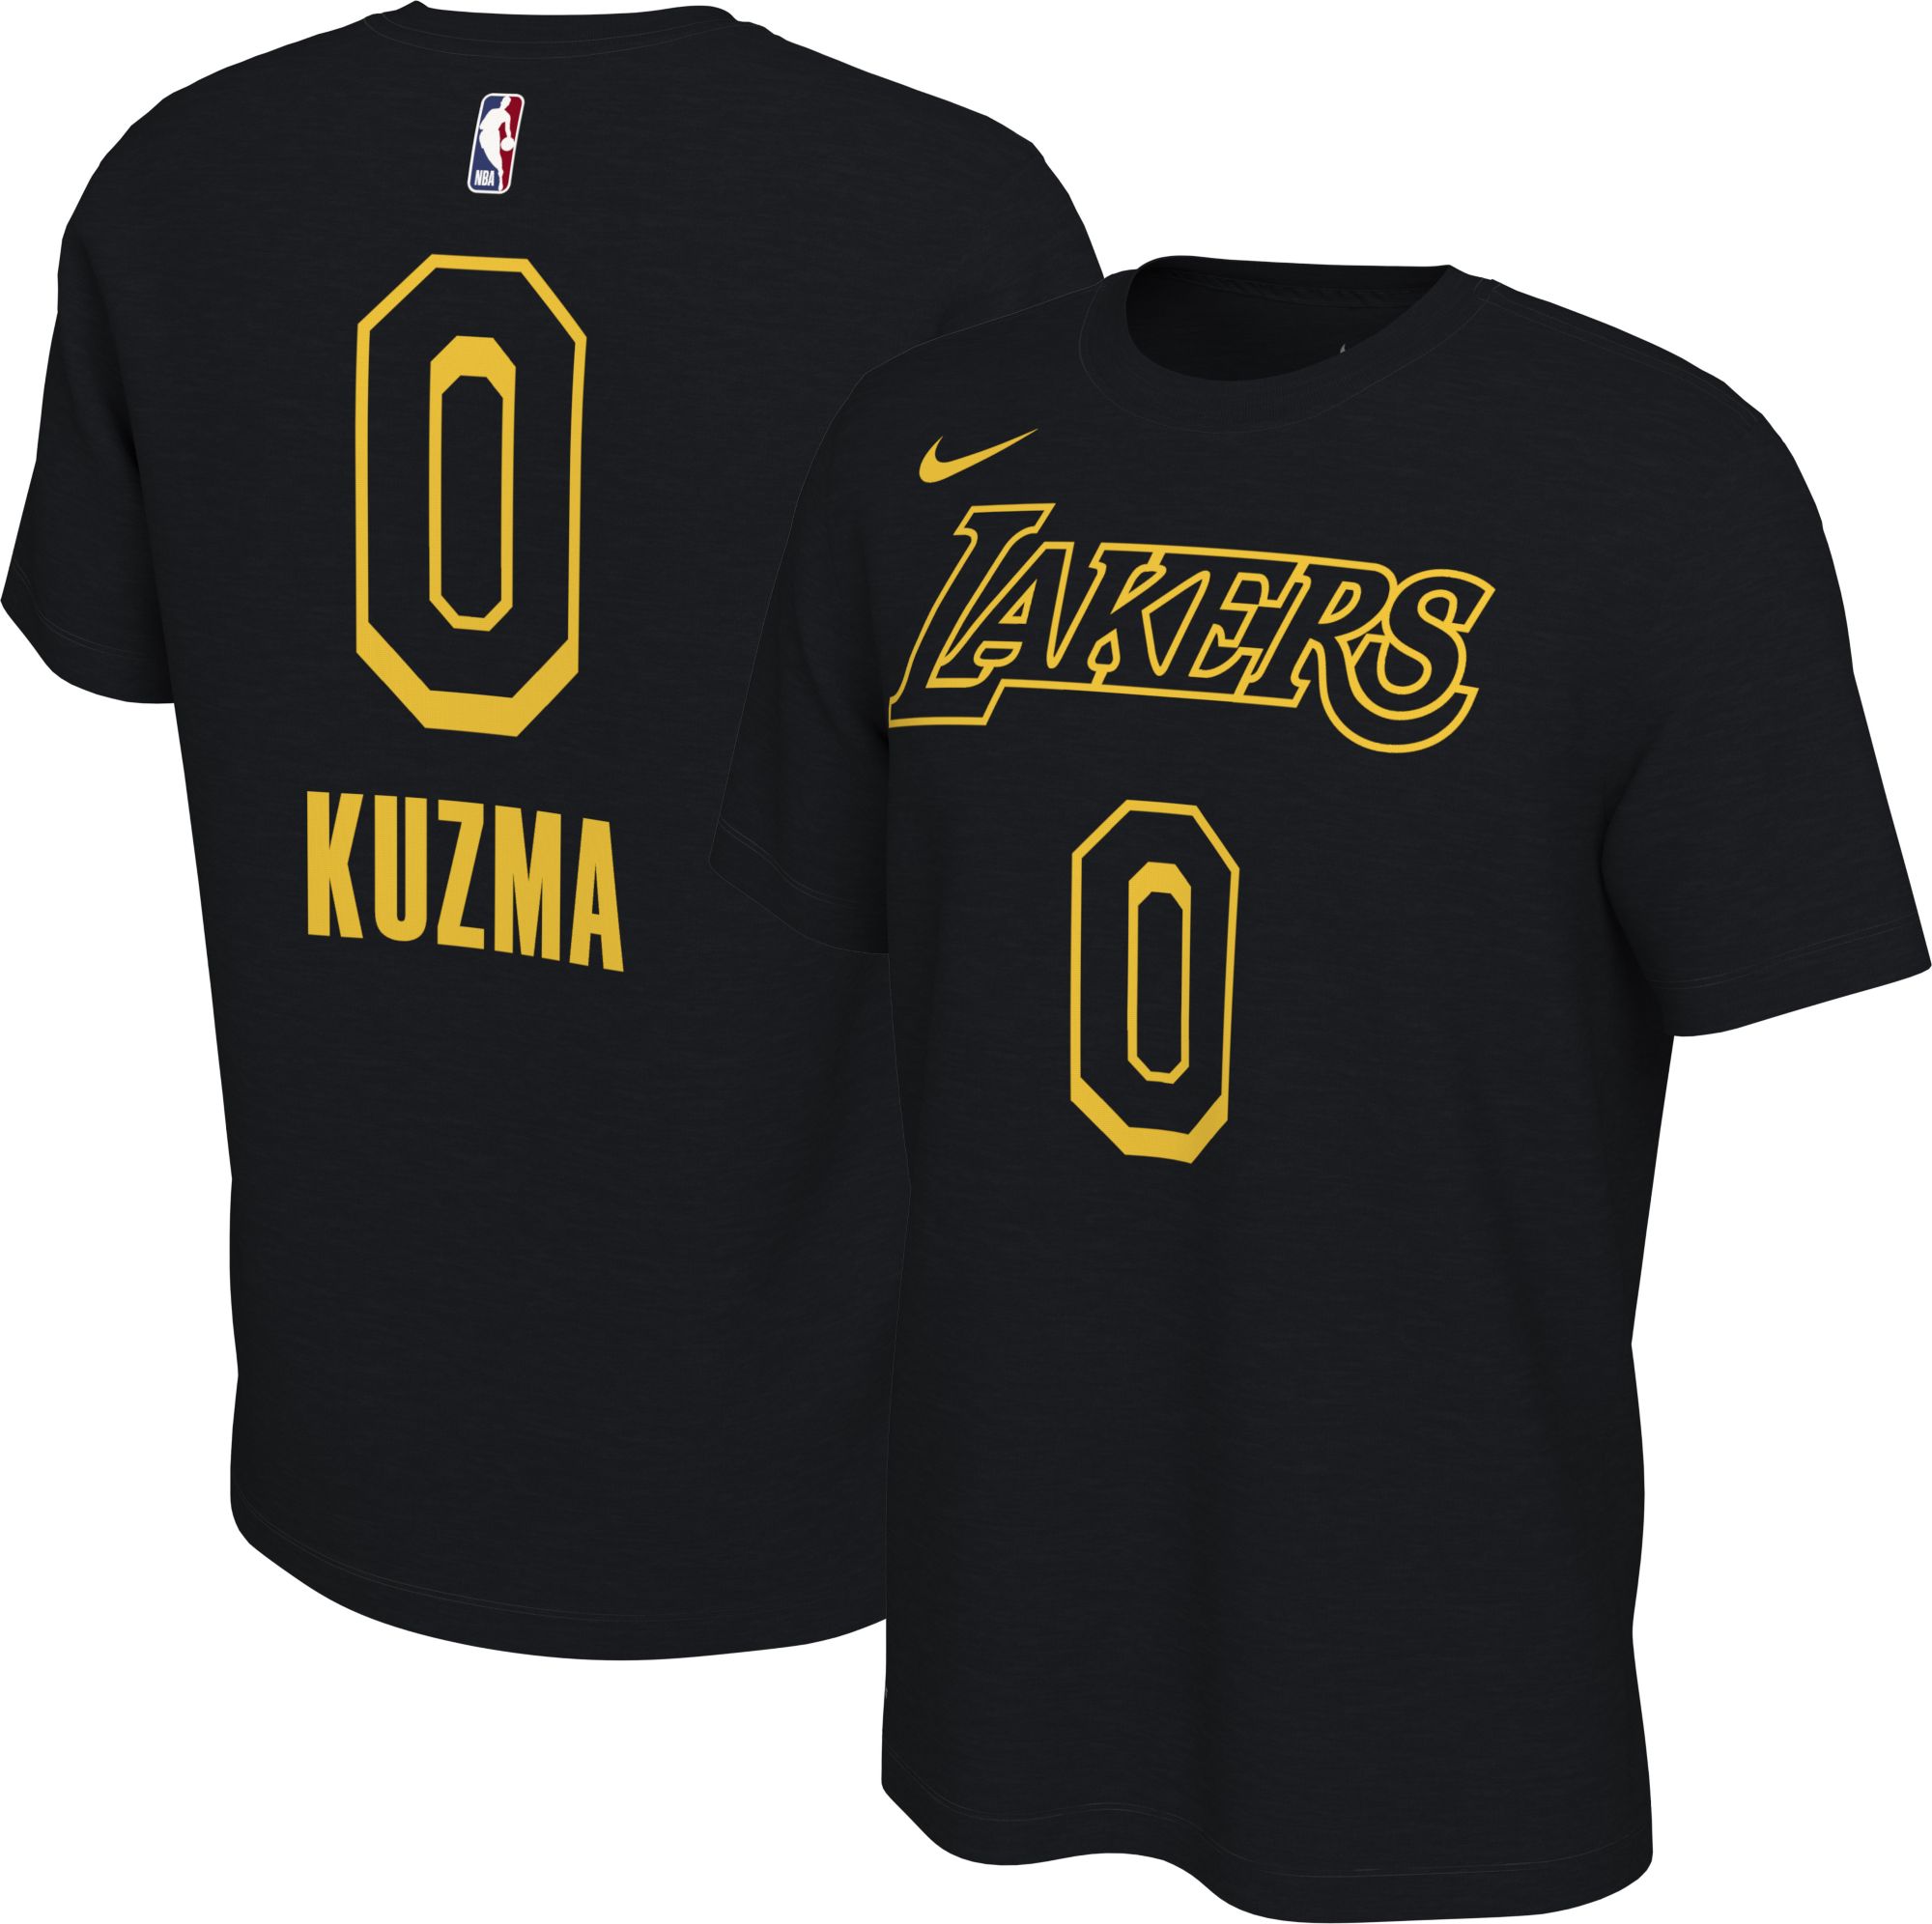 lakers gear for kids